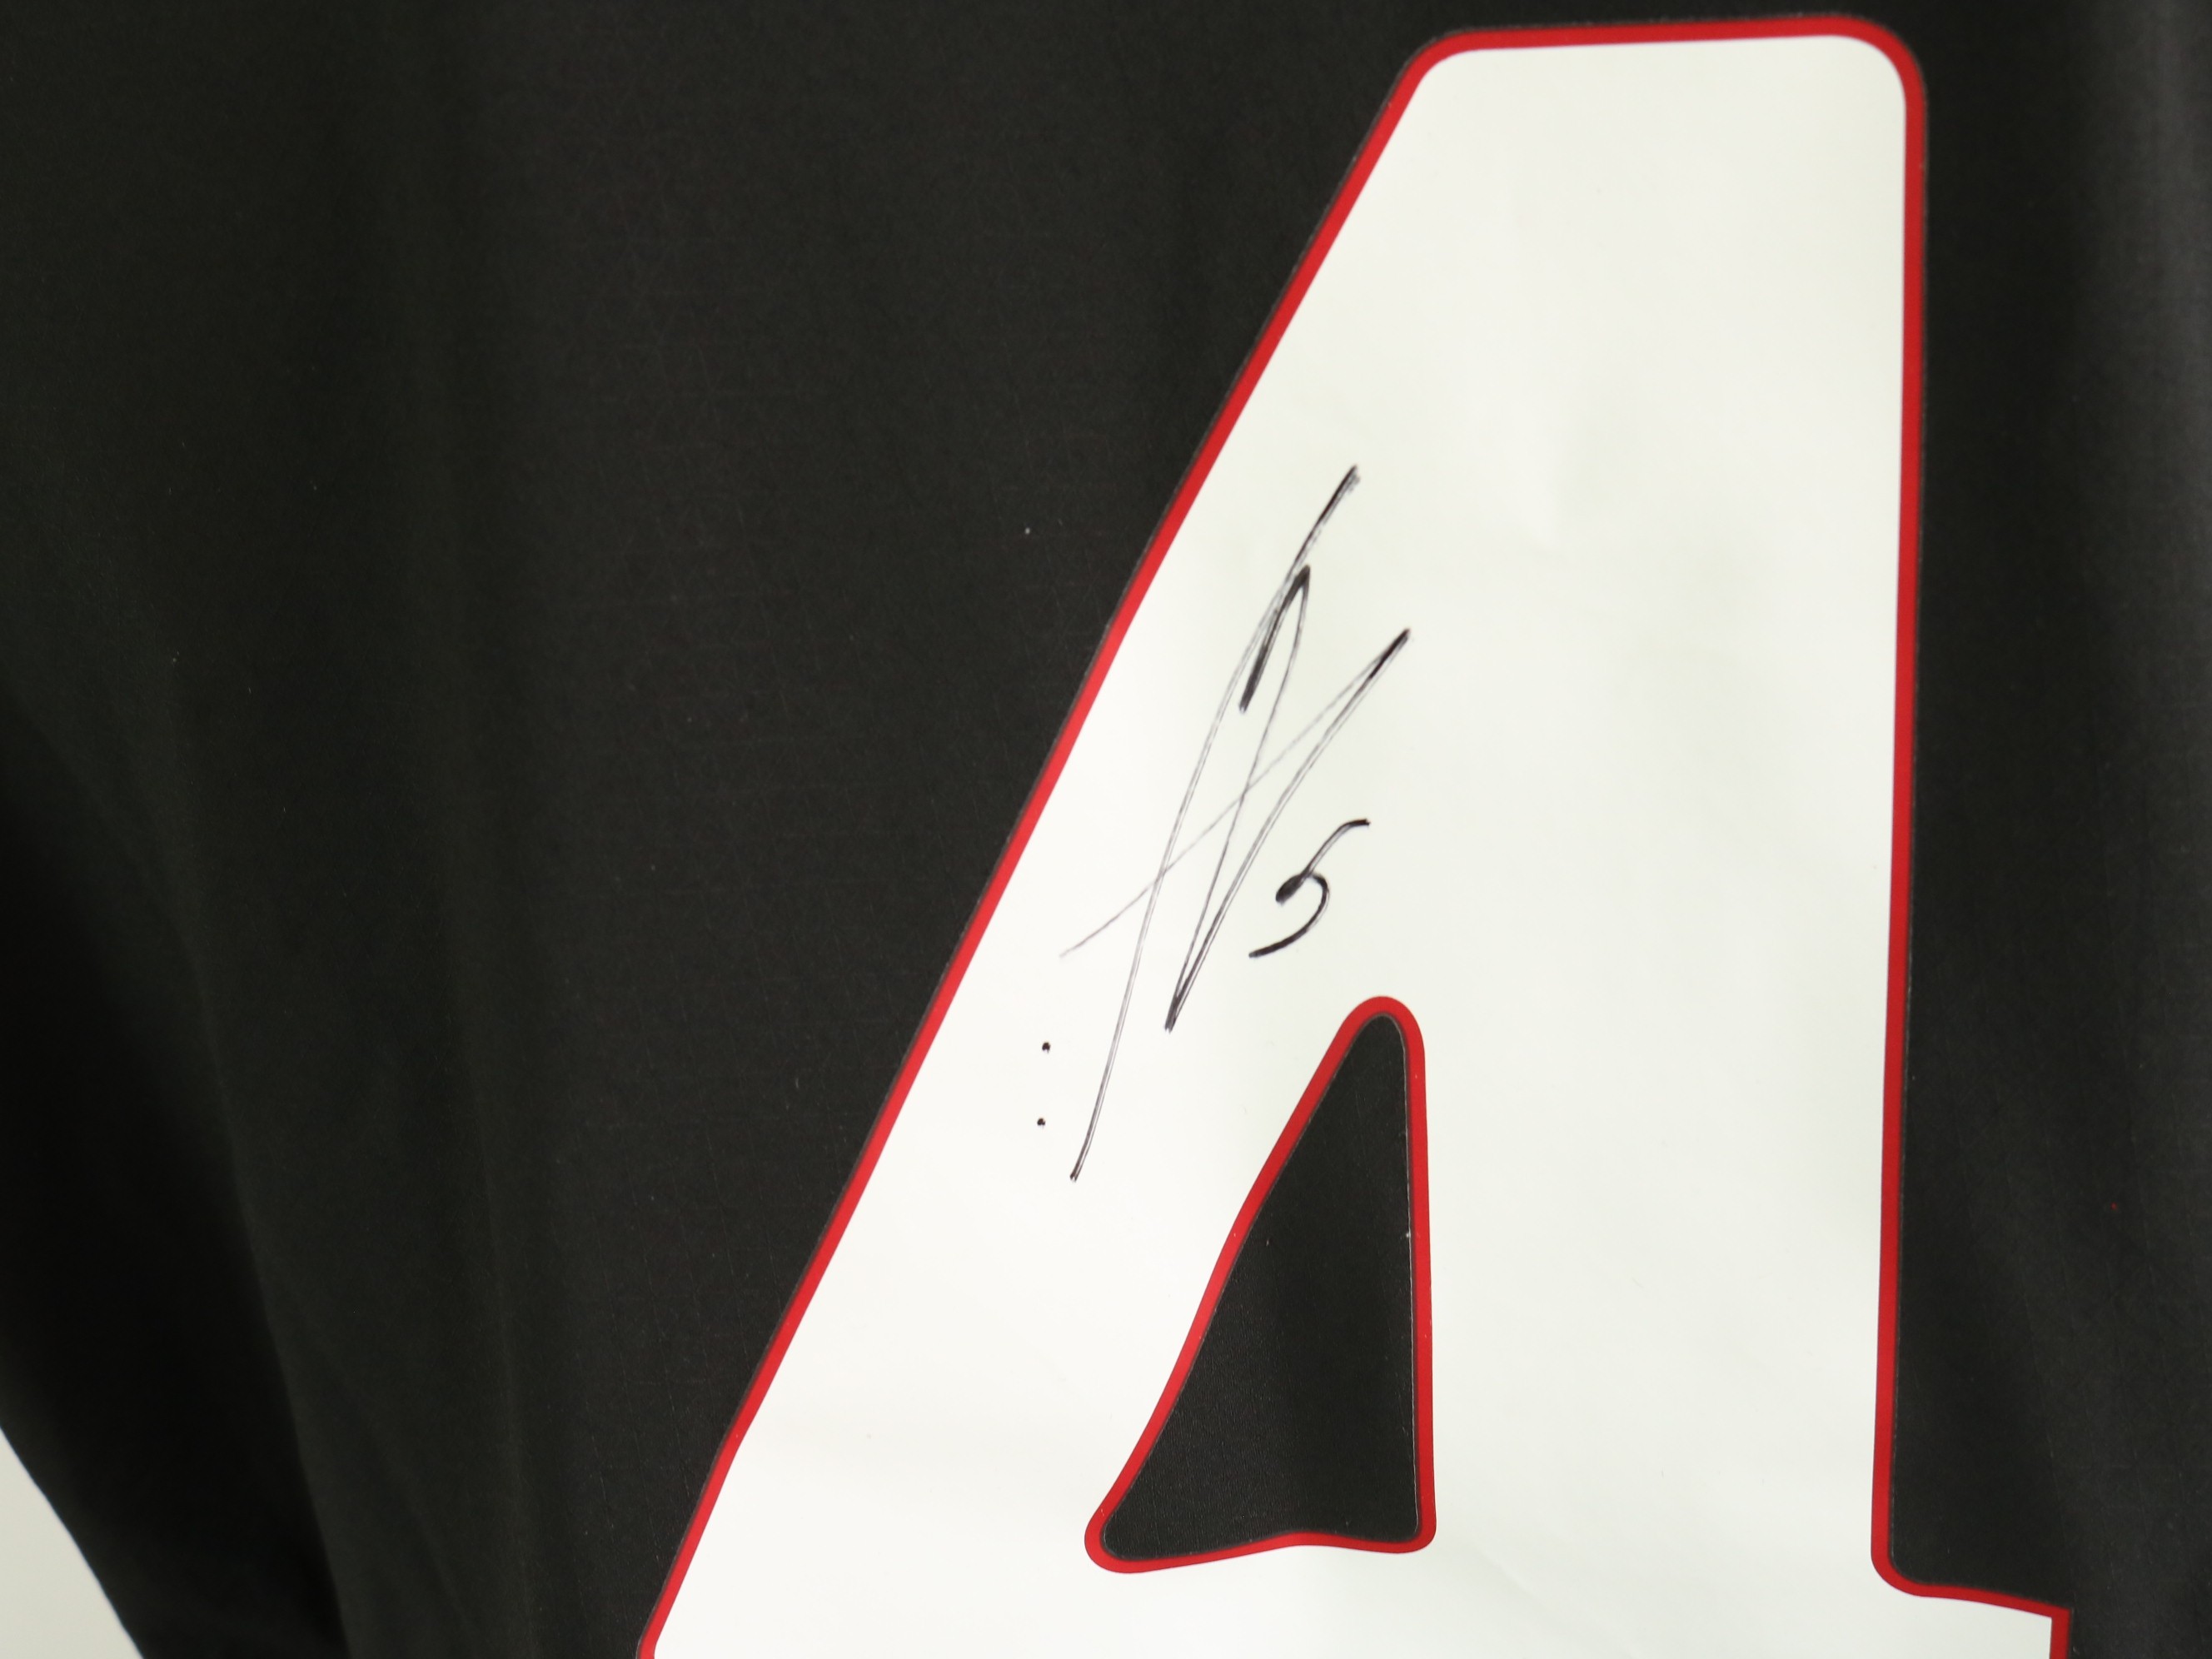 Wade's Official Miami Heat Signed Jersey - CharityStars